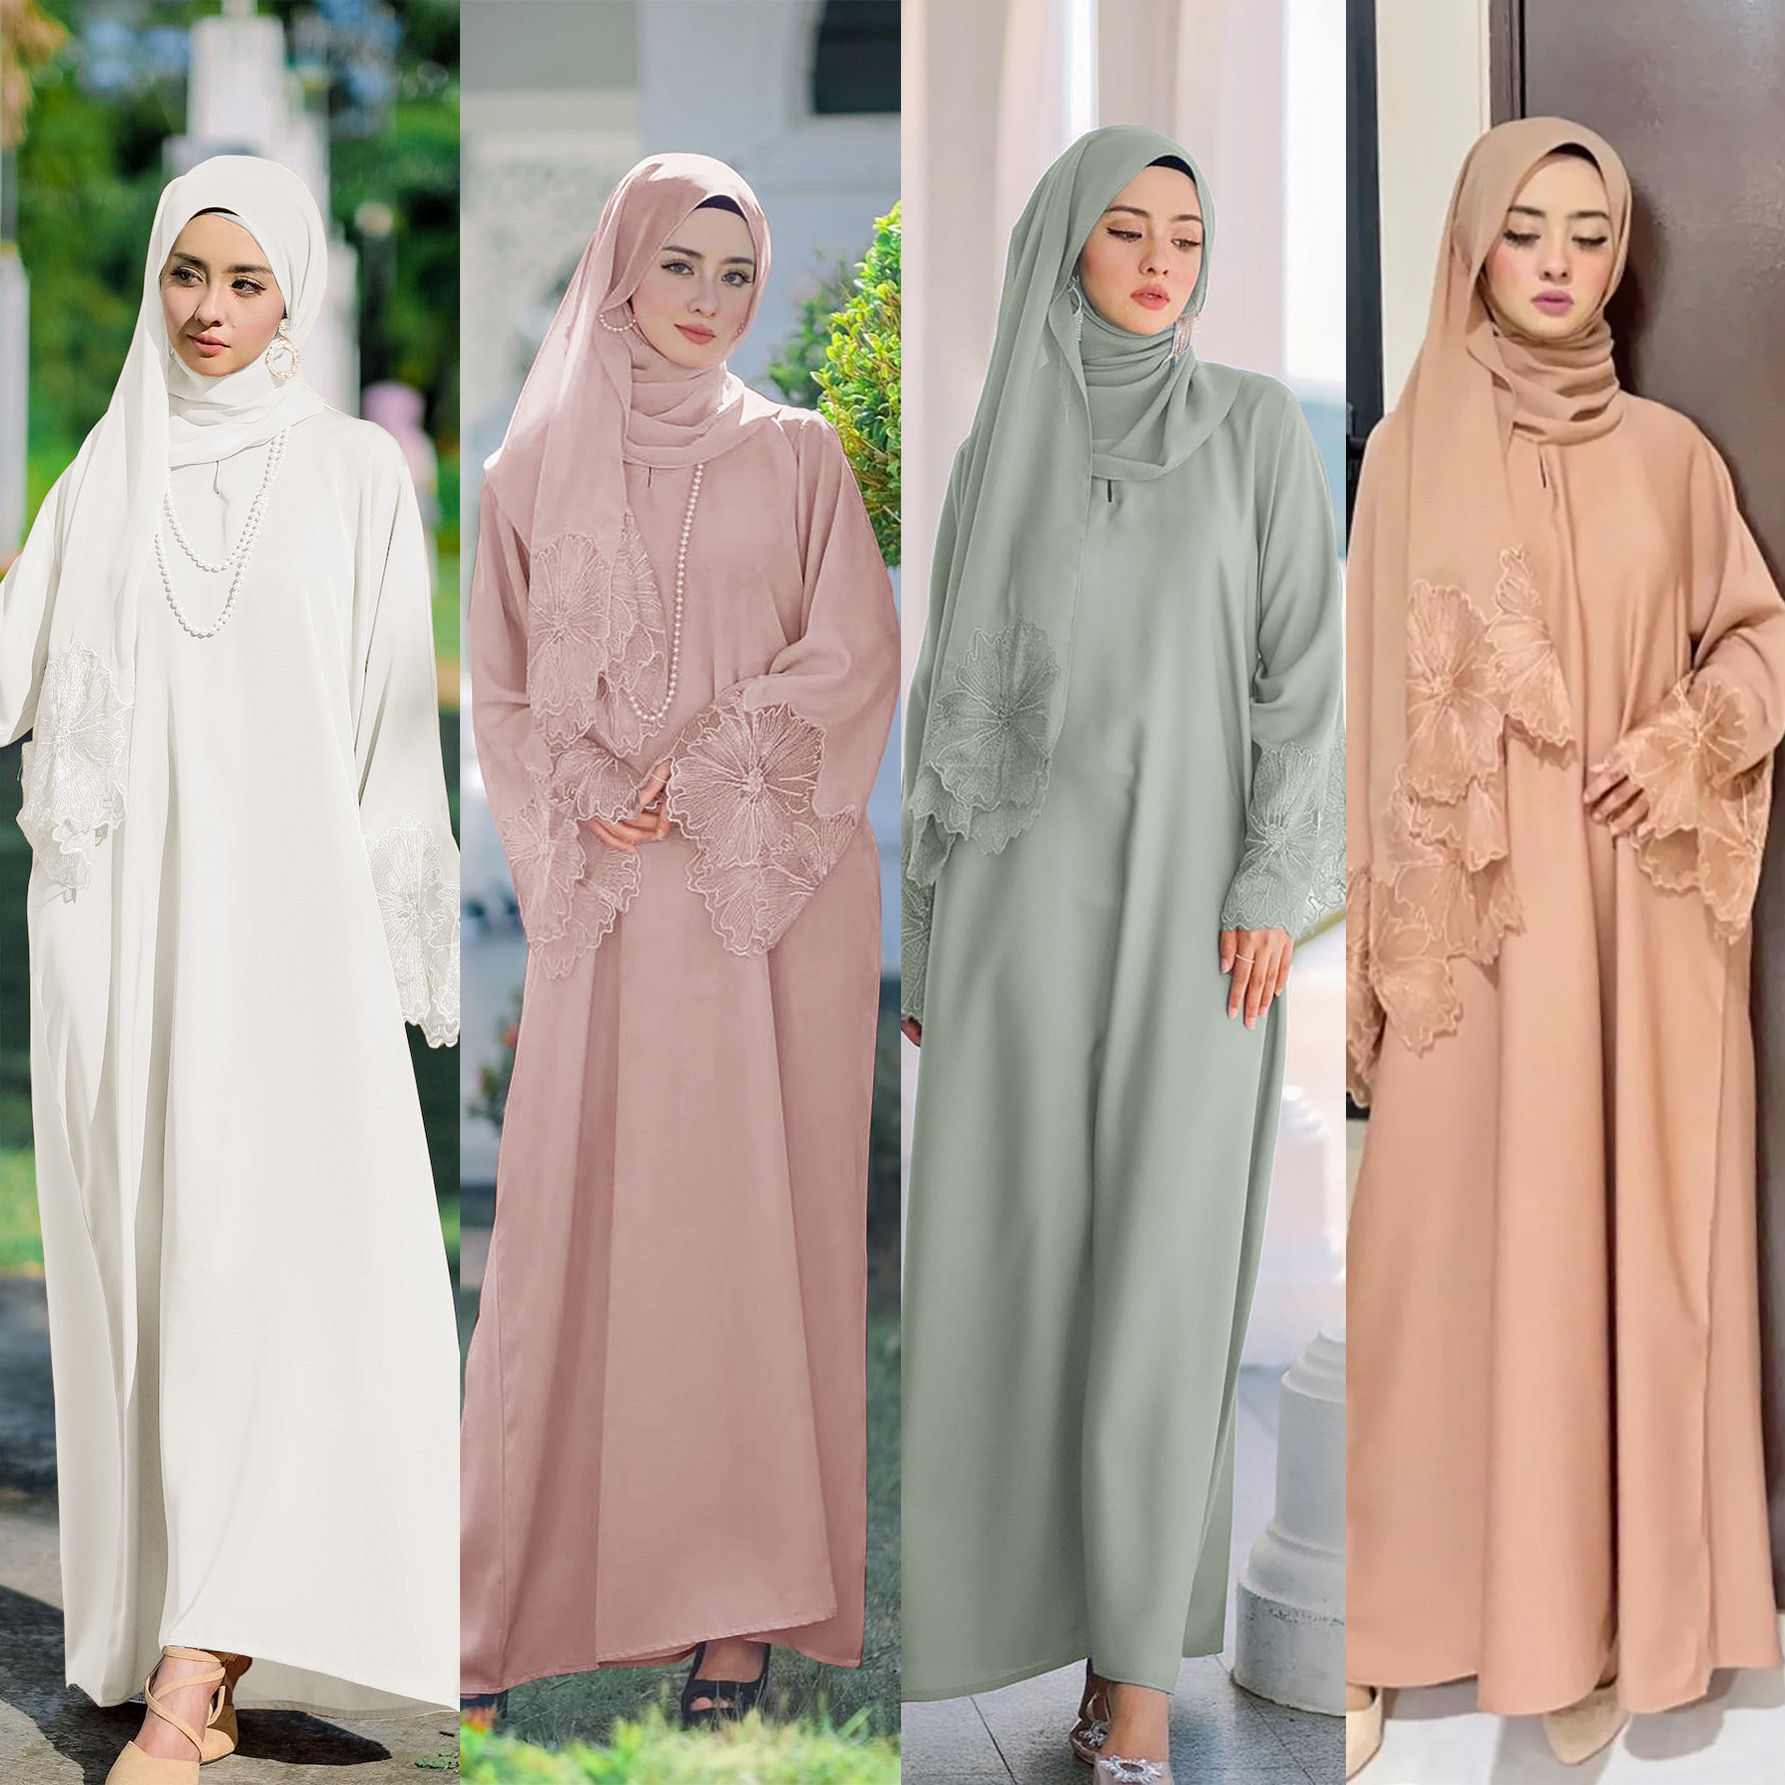 M189 Inga borr 5 färger i Mellanöstern Foreign Trade Women's Muslim Lads Robes Malay Indonesia Dress with Hijab